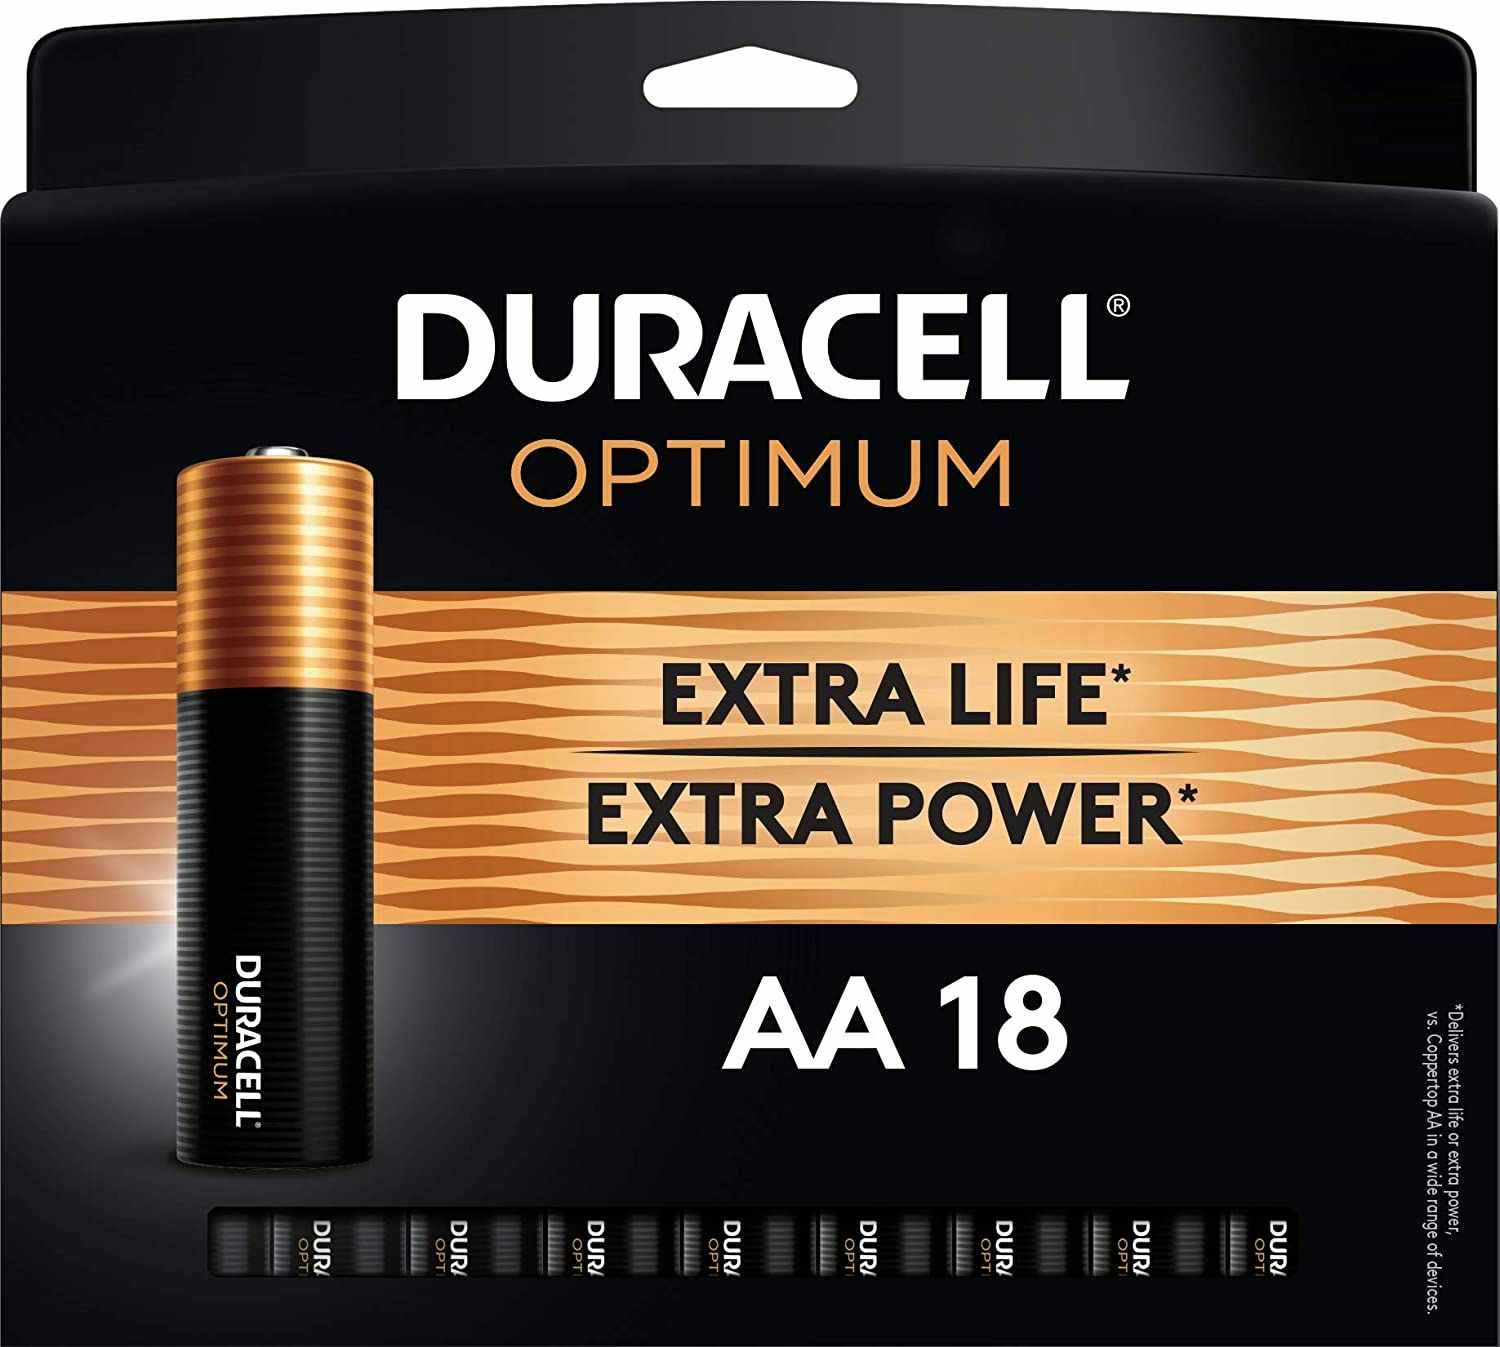 A pack of Duracell AA batteries